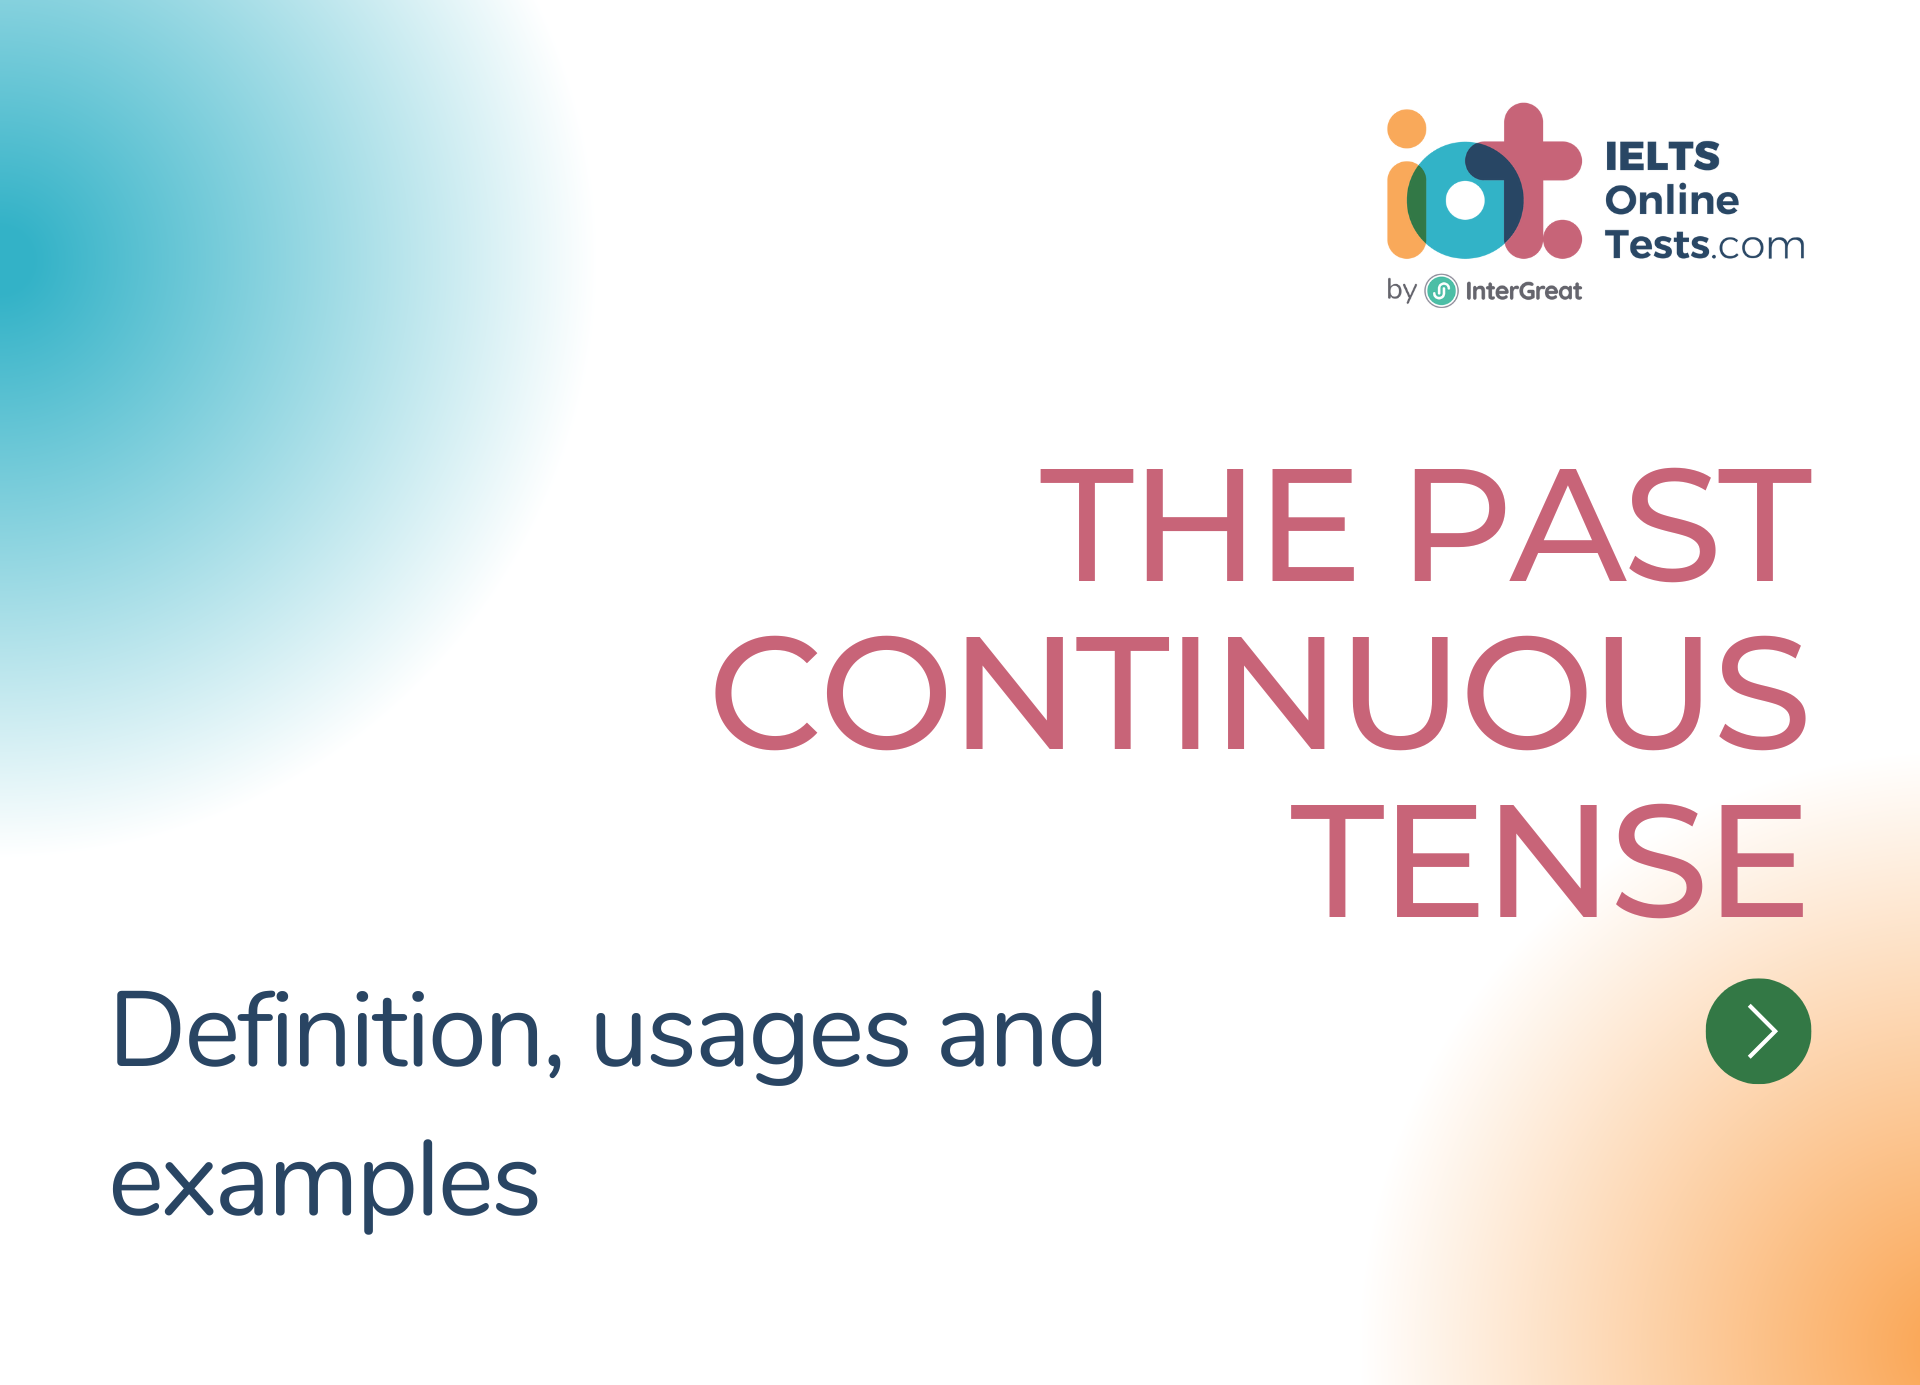 The past continuous tense